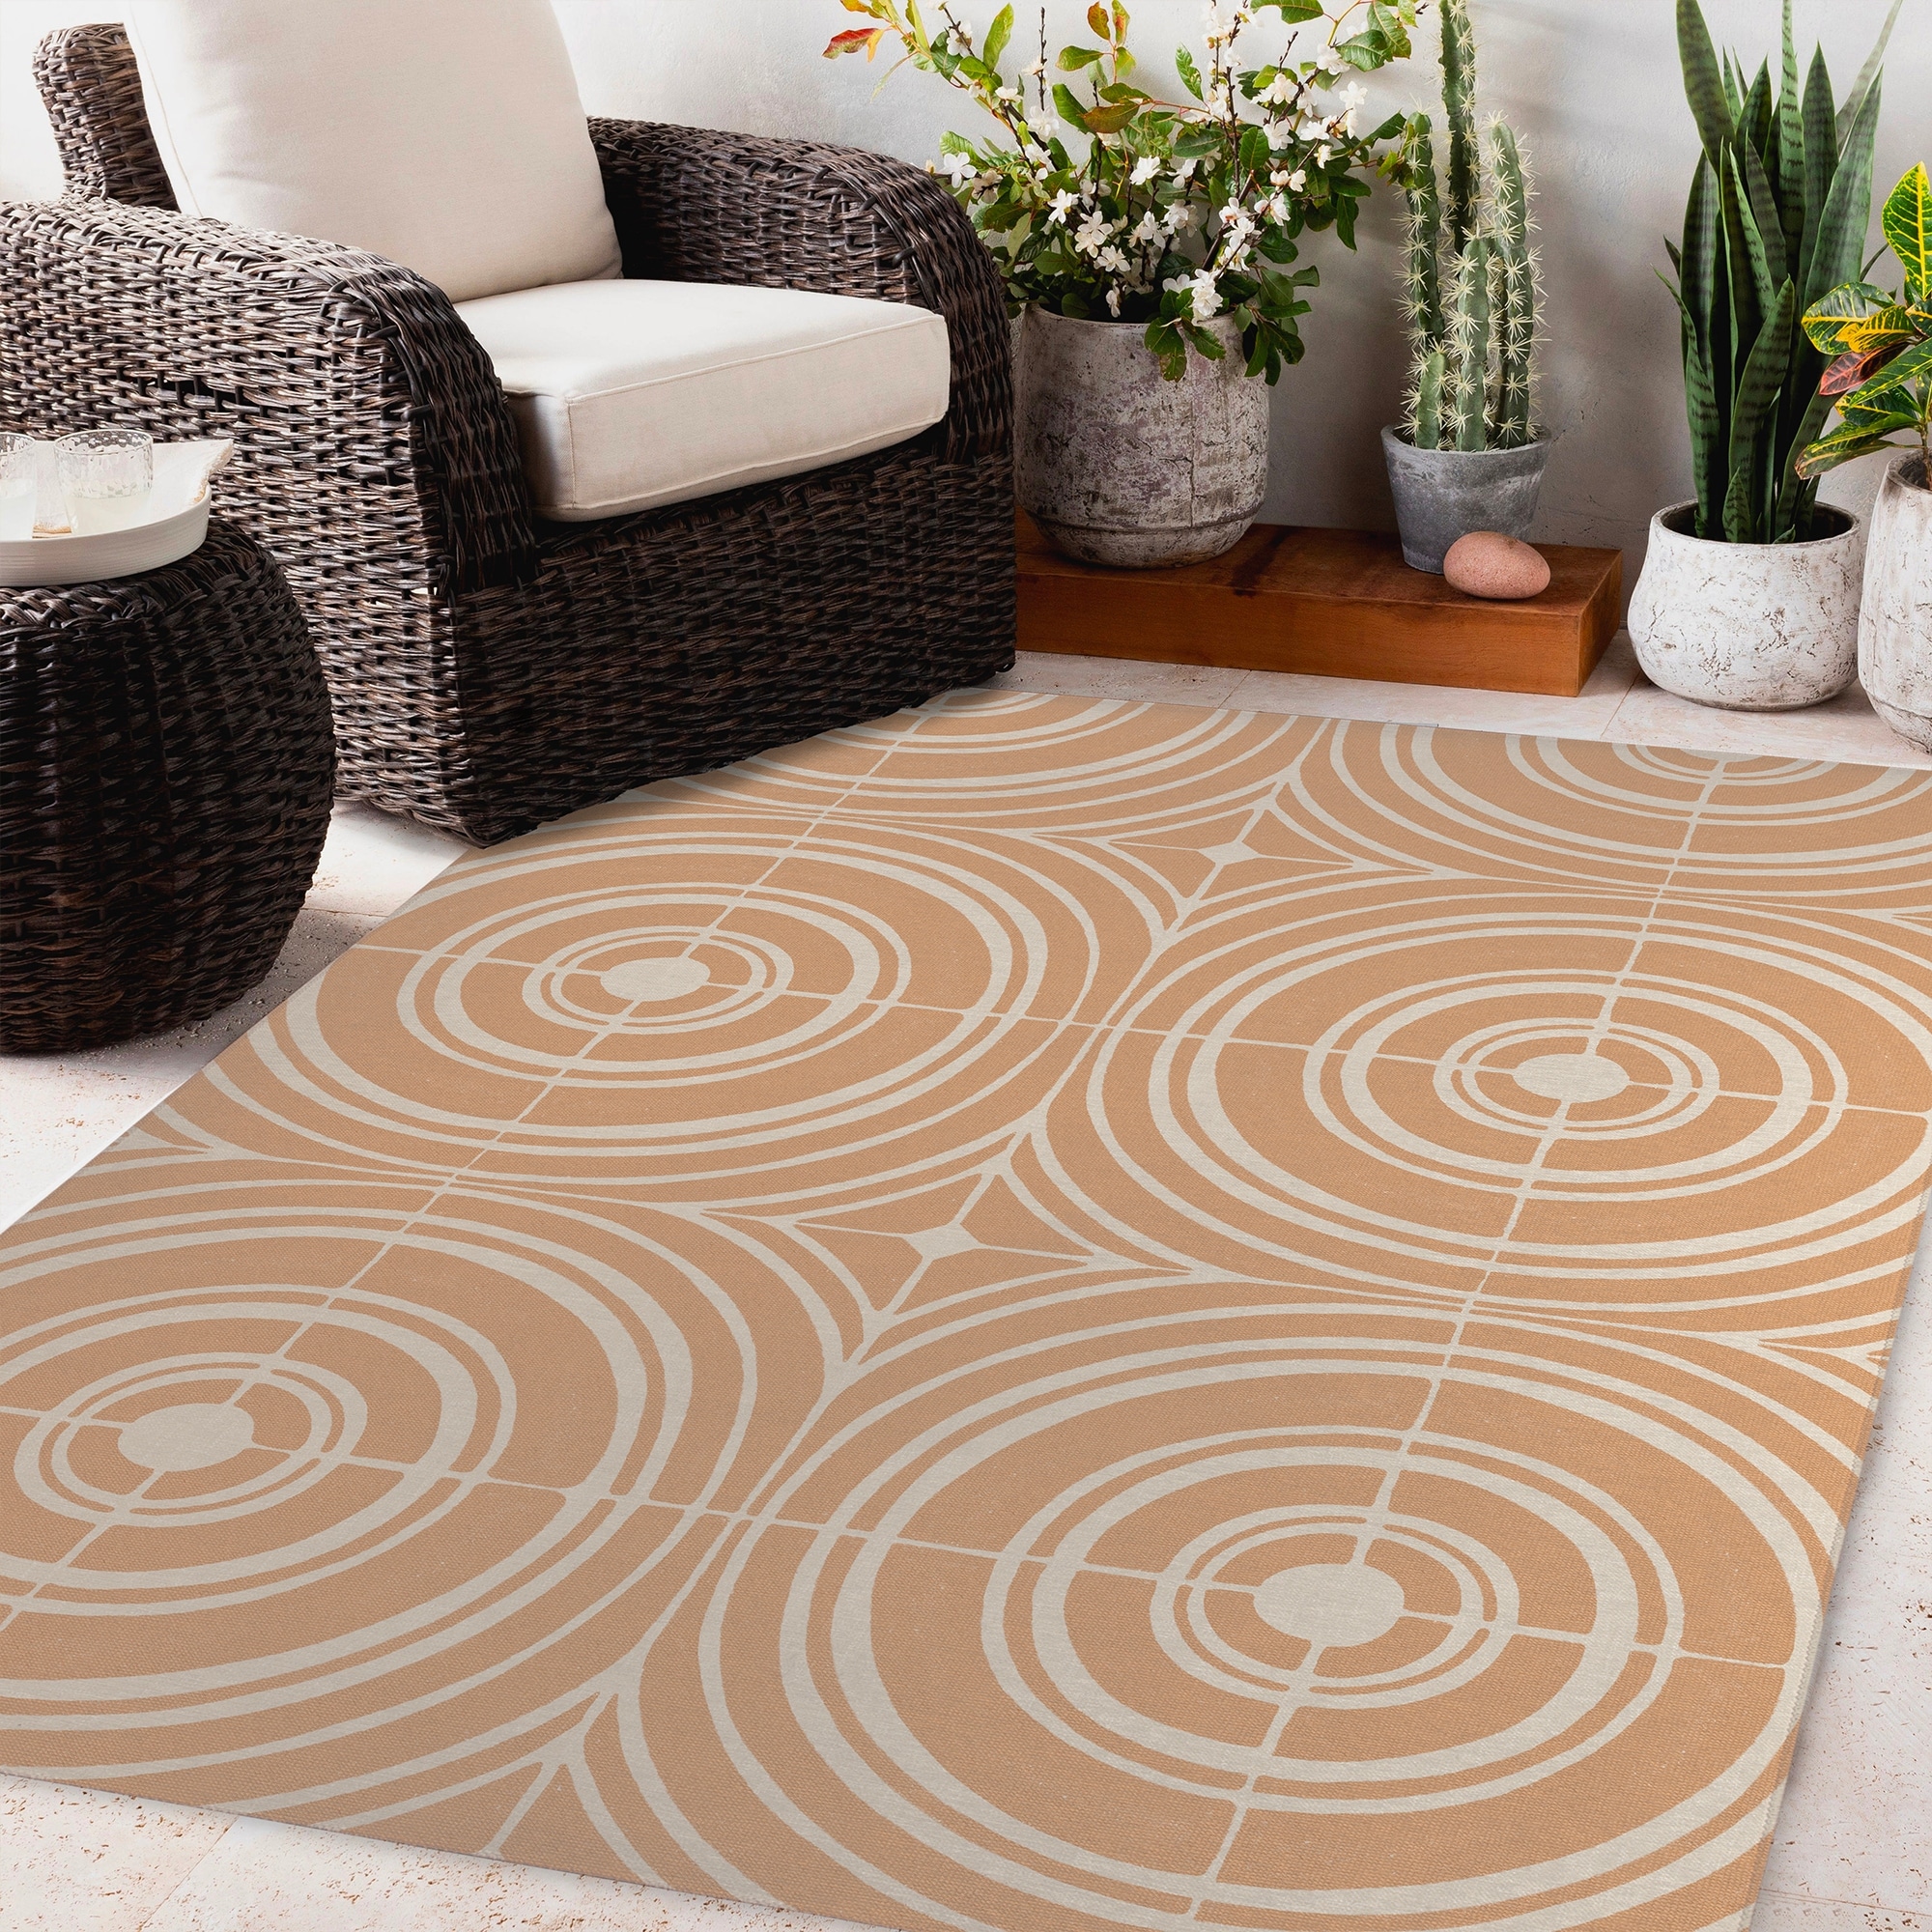 https://ak1.ostkcdn.com/images/products/is/images/direct/2ebba05dd3414e6f7eabad1a74bc62215705149e/TARGET-TERRACOTTA-Outdoor-Rug-By-Kavka-Designs.jpg